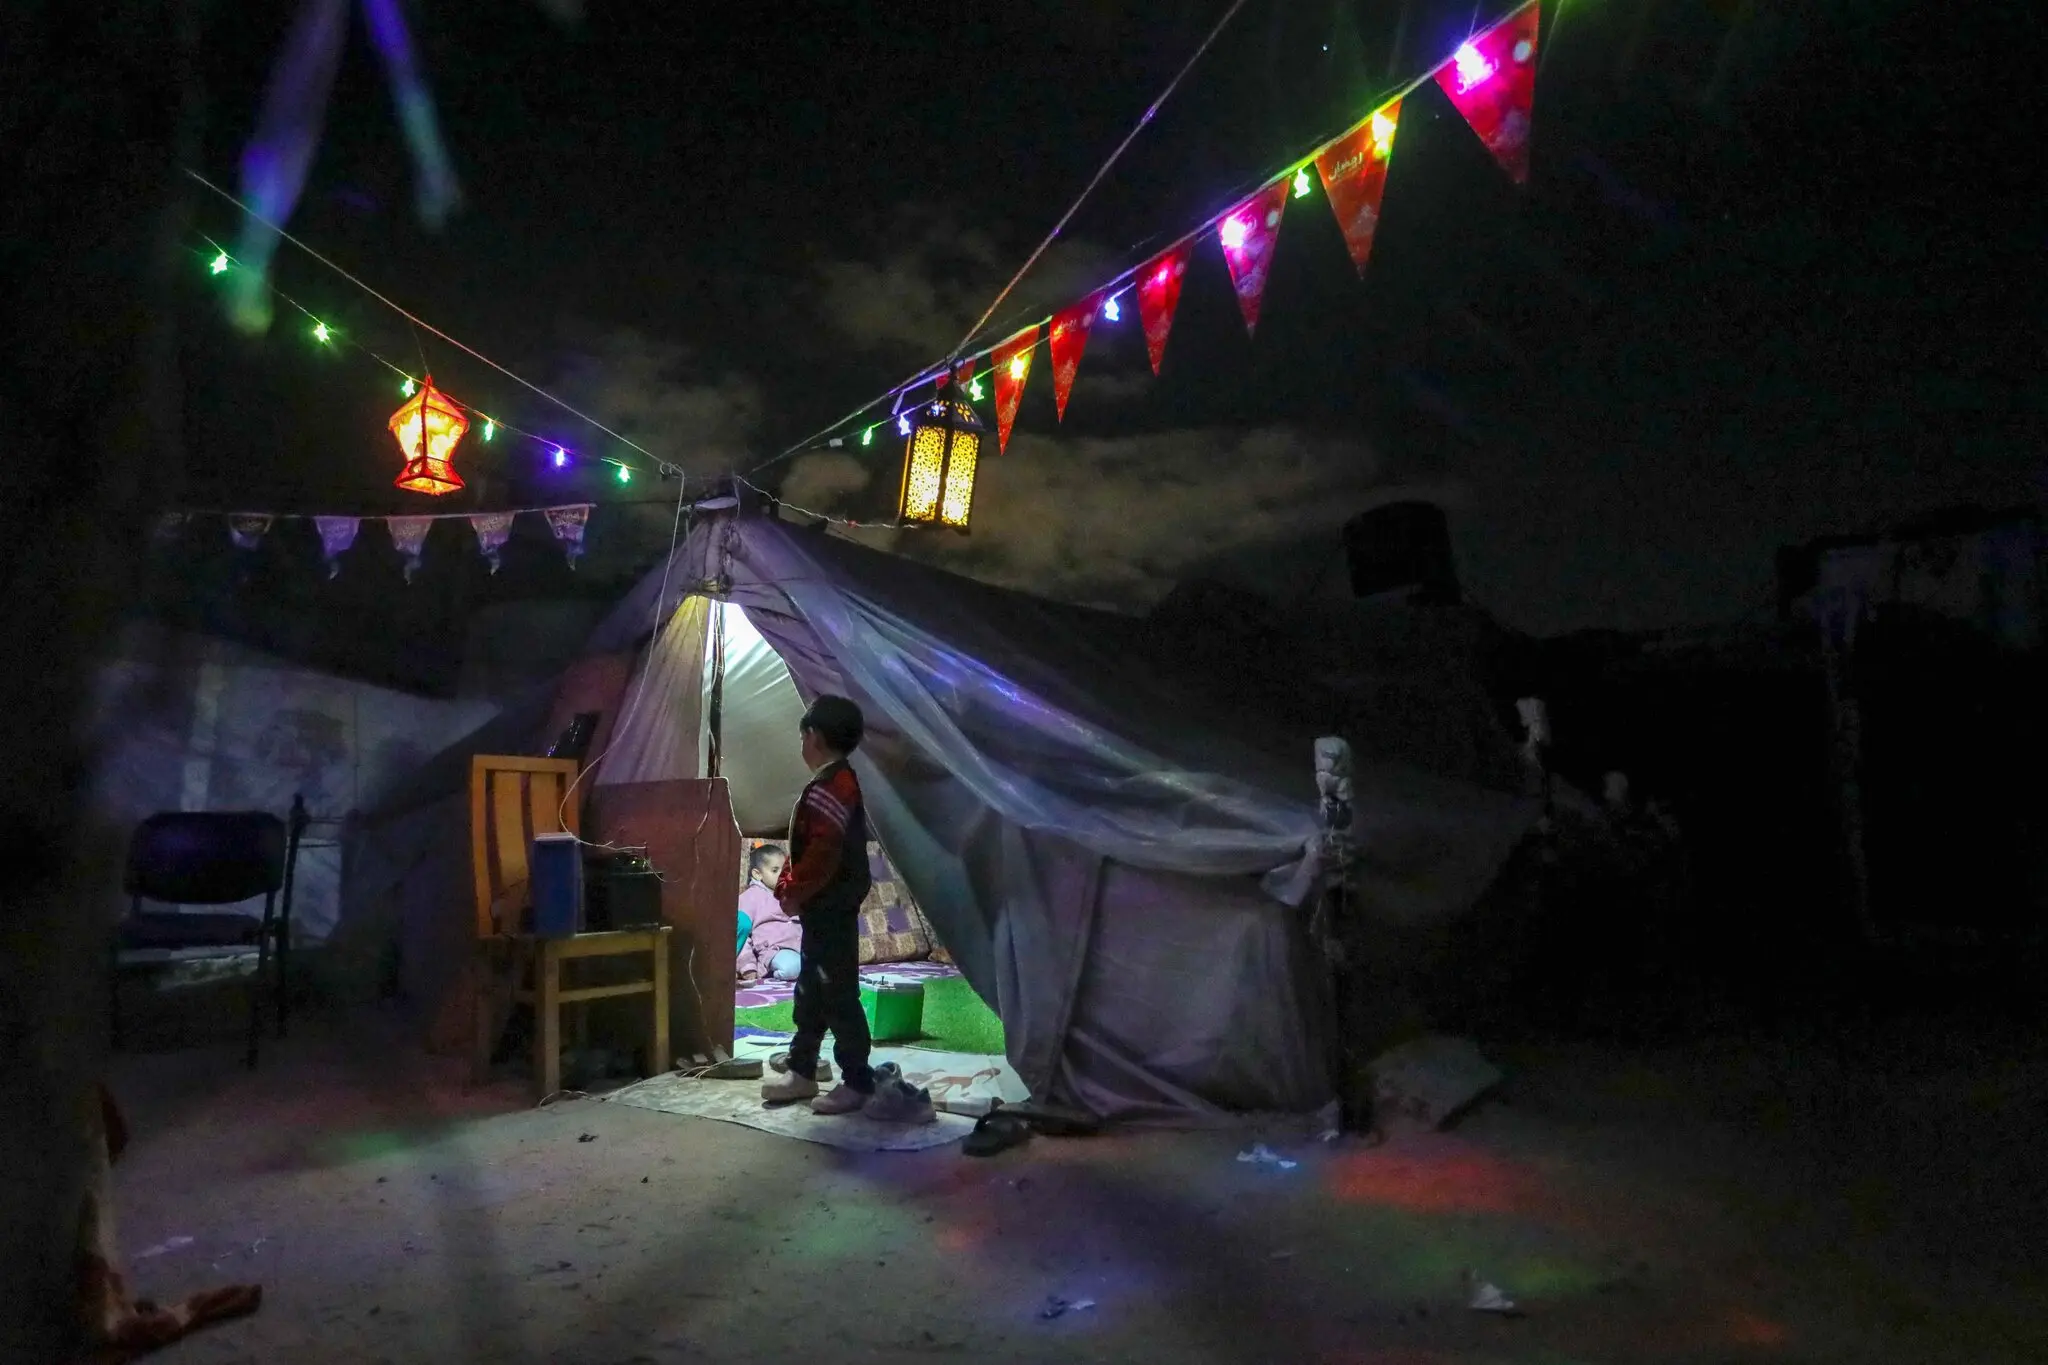 decorated tents in light of displacement